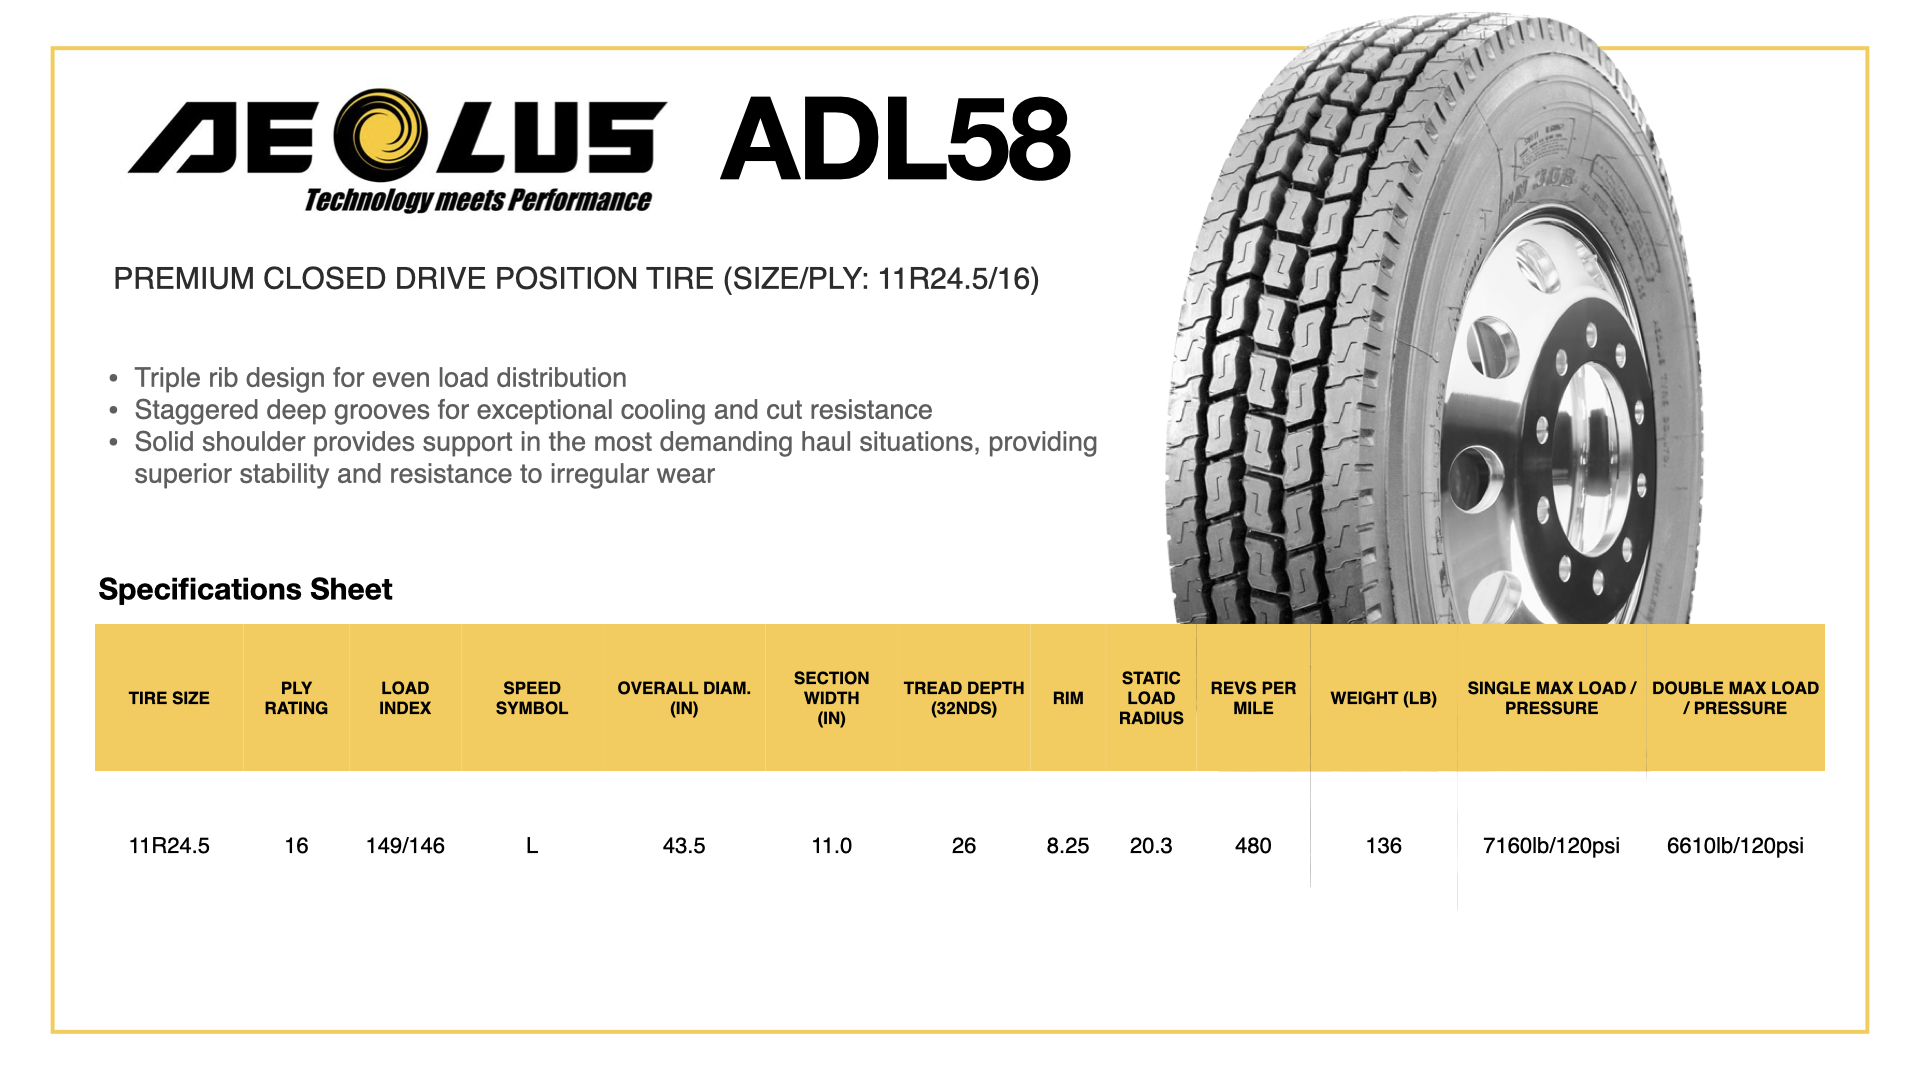 Aeolus ADL58 11R24.5 Specifications Sheet